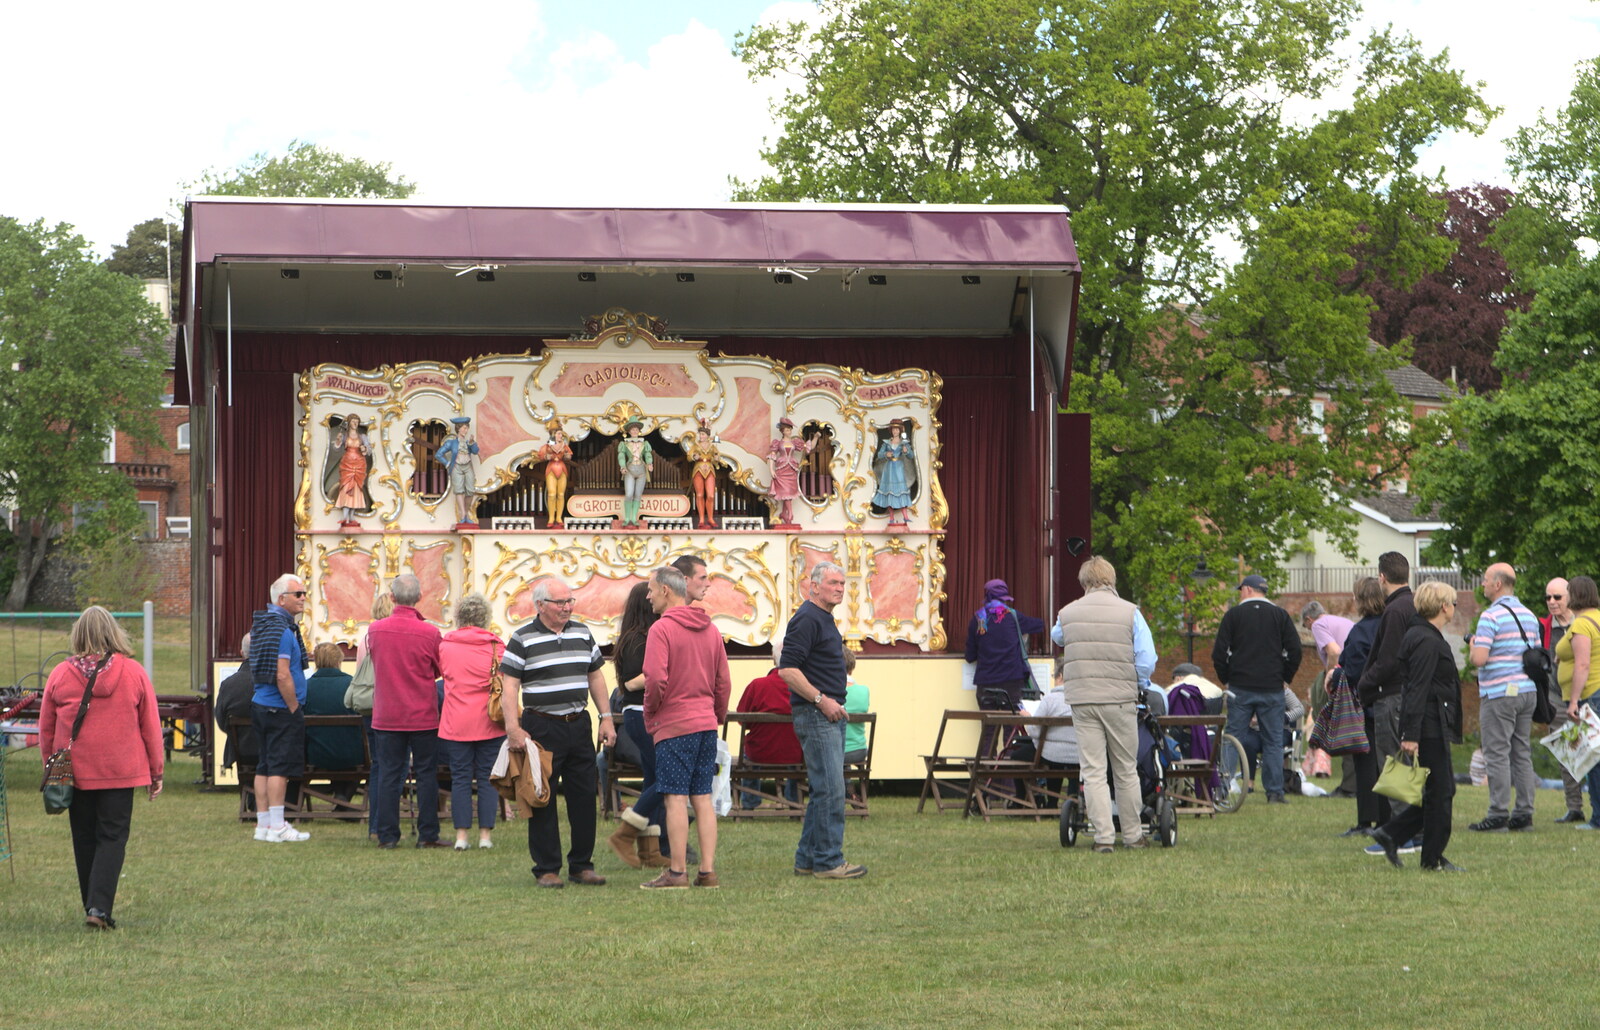 De Grote Gadioli organ in the park from The Diss Organ Festival, Diss, Norfolk - 14th May 2017